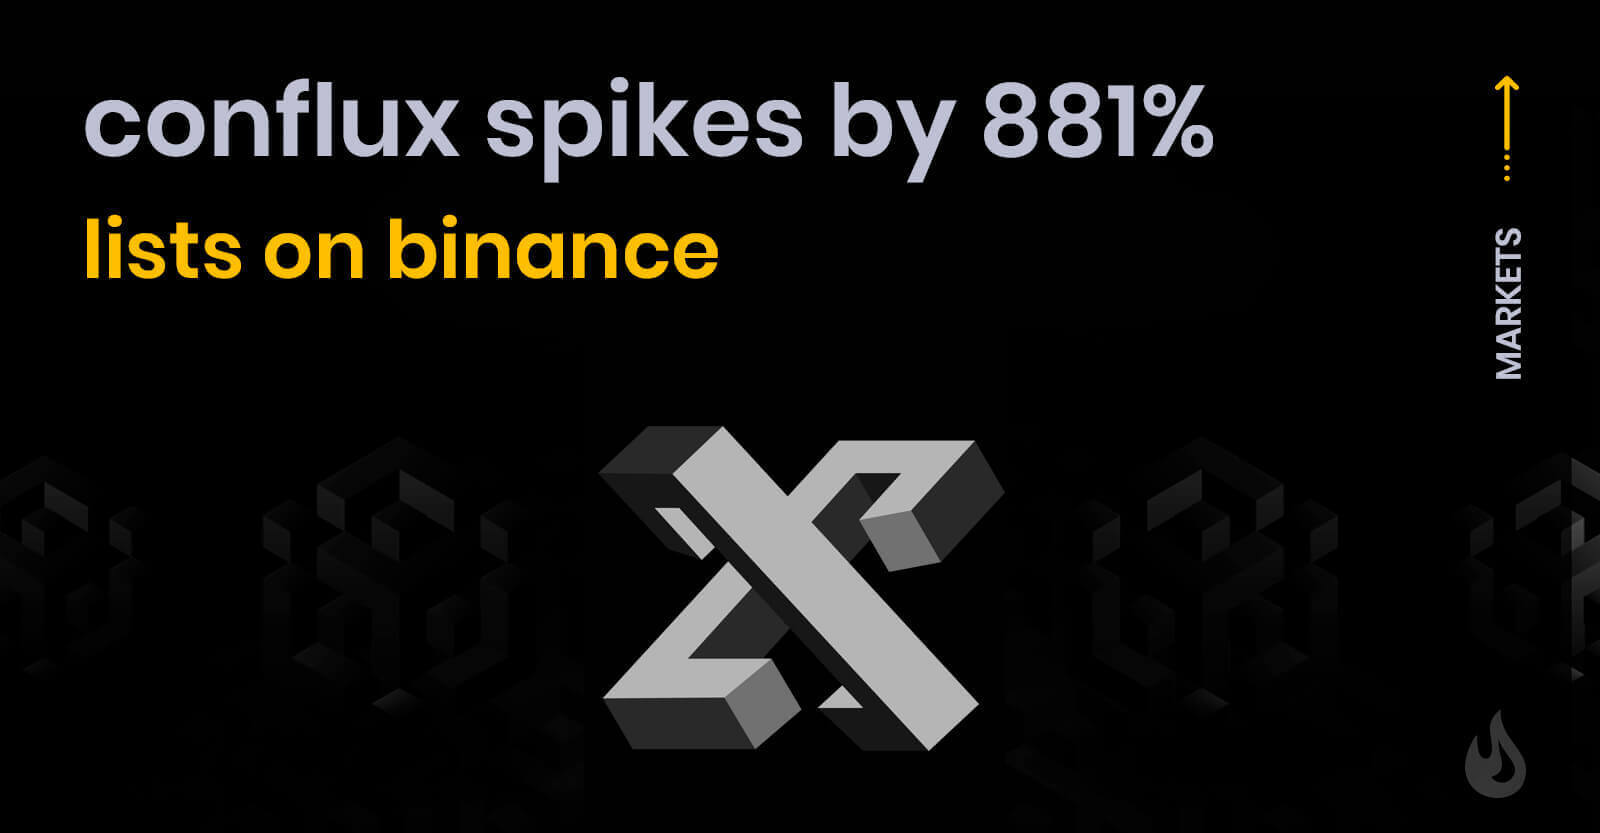 Conflux (CFX) Opens On Binance After 3-Month Meteoric 881% ...